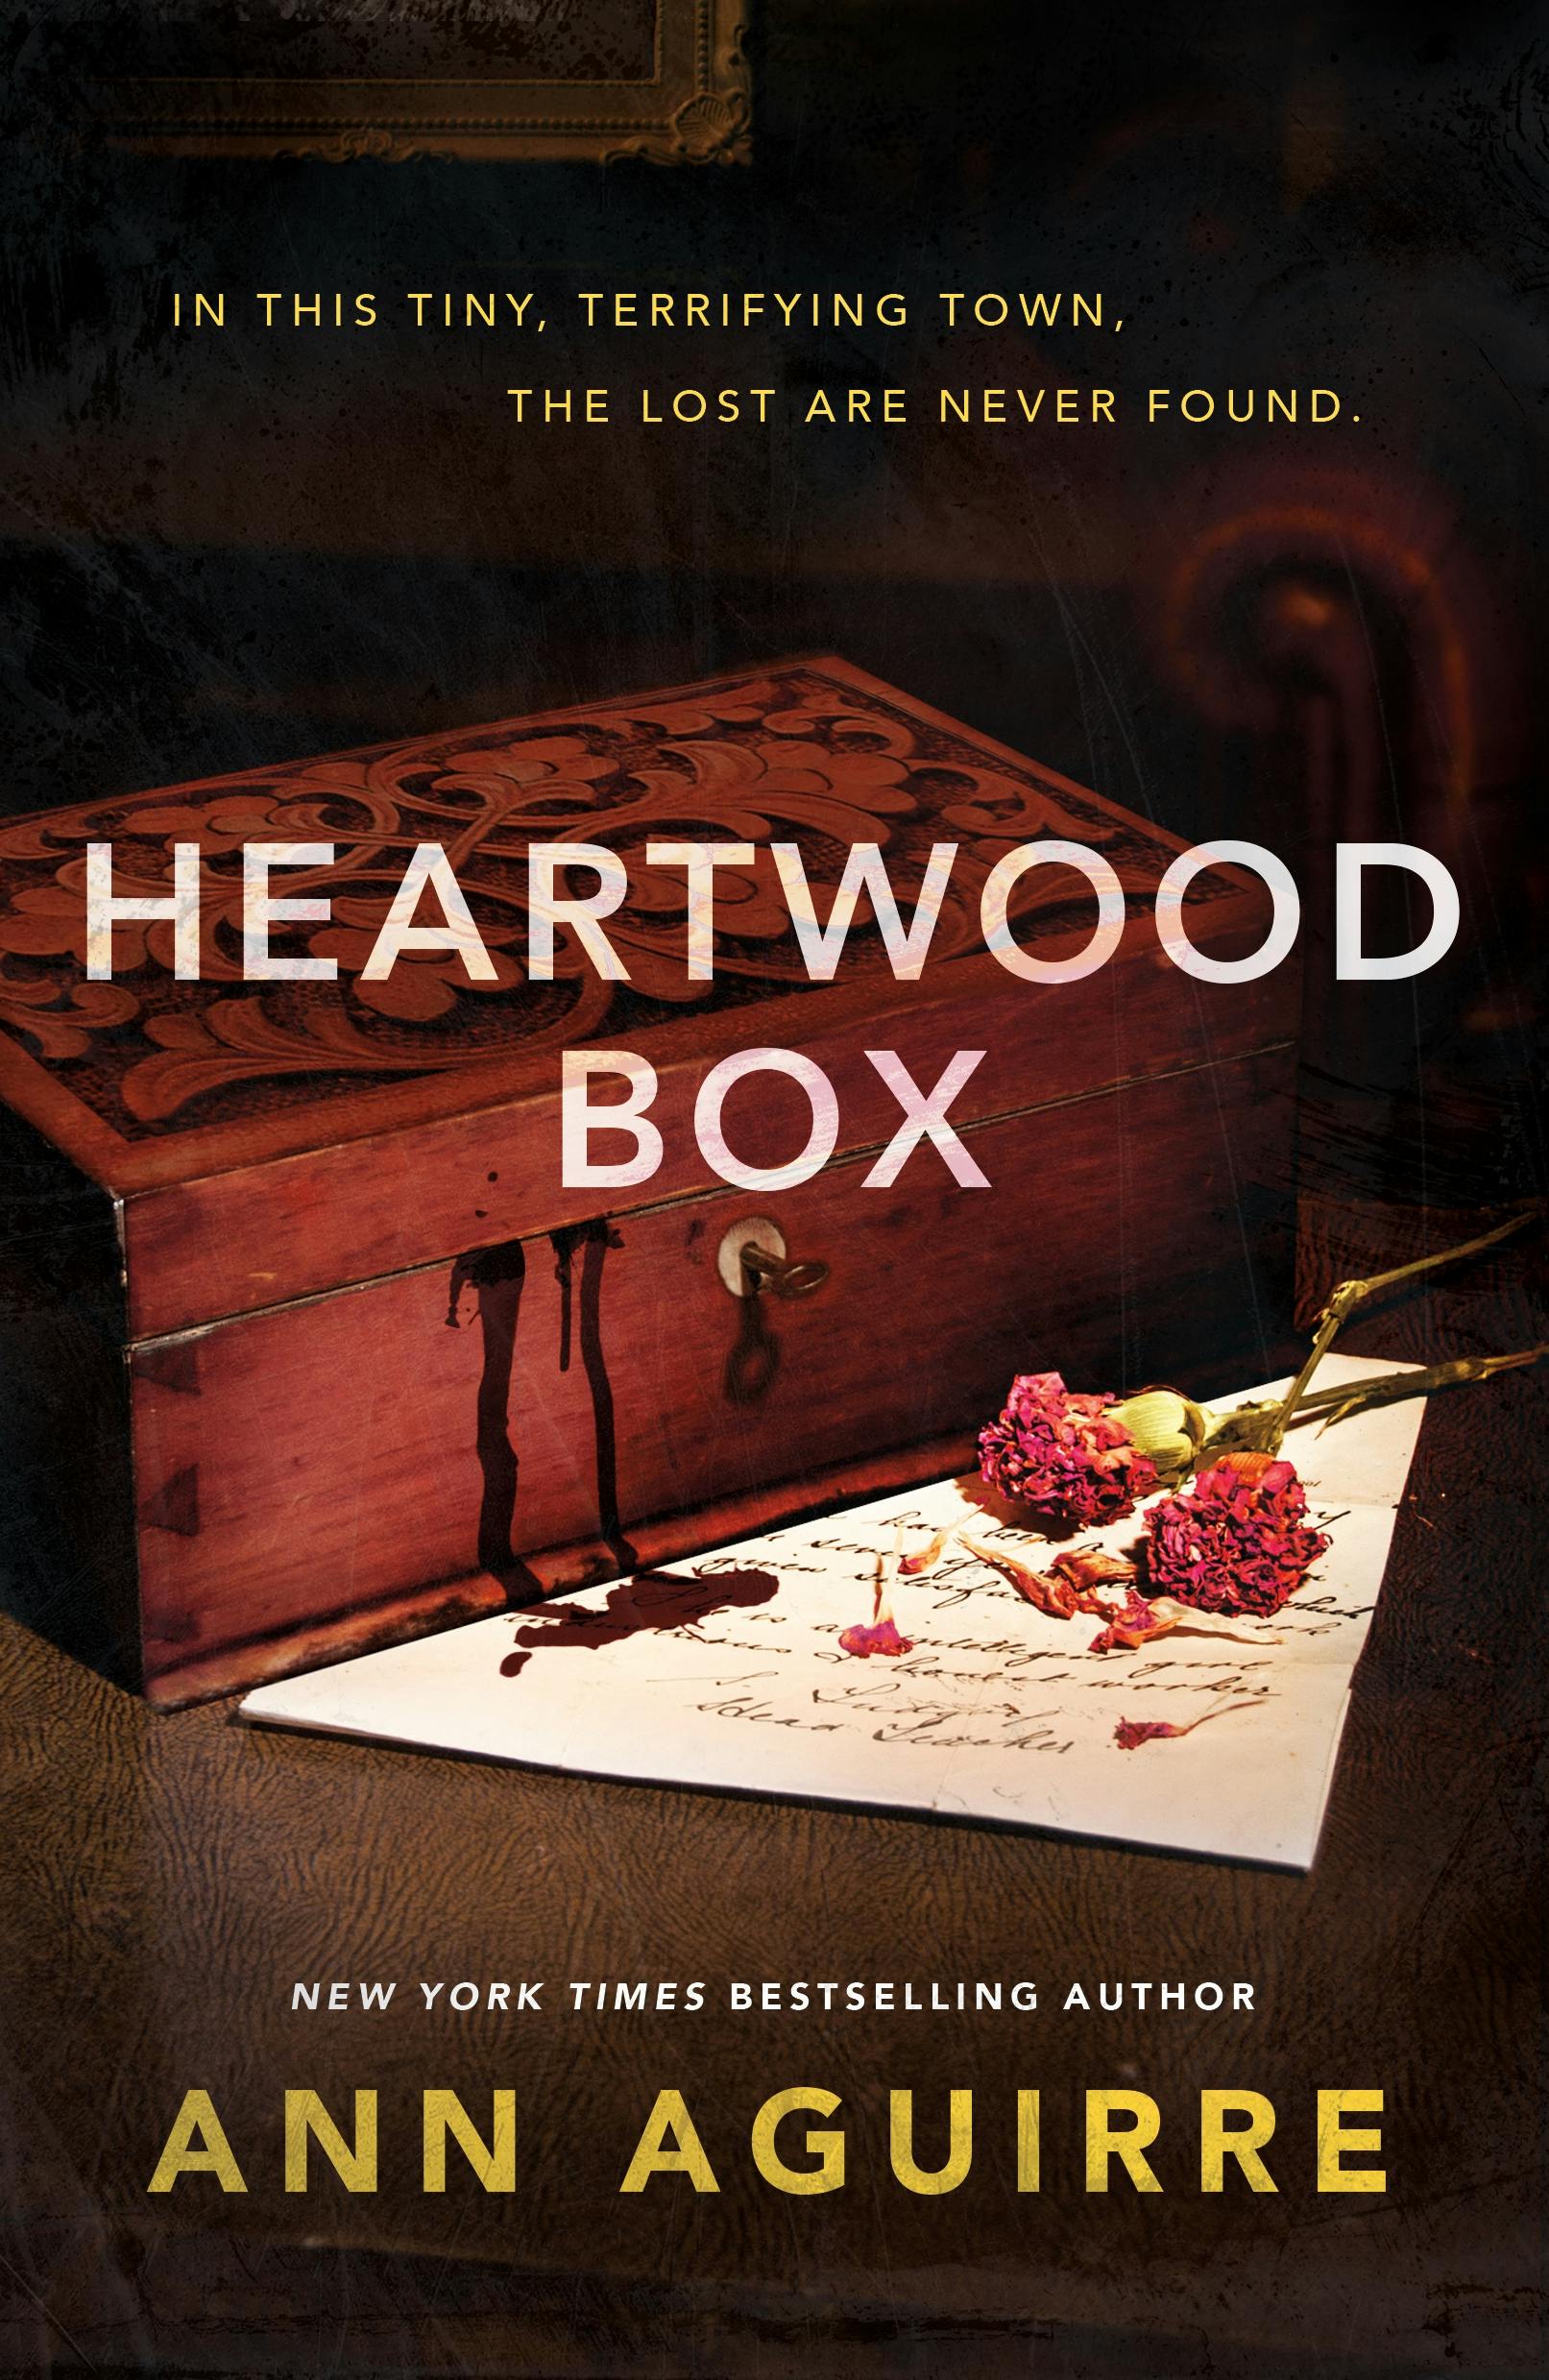 Cover for the book titled as: Heartwood Box